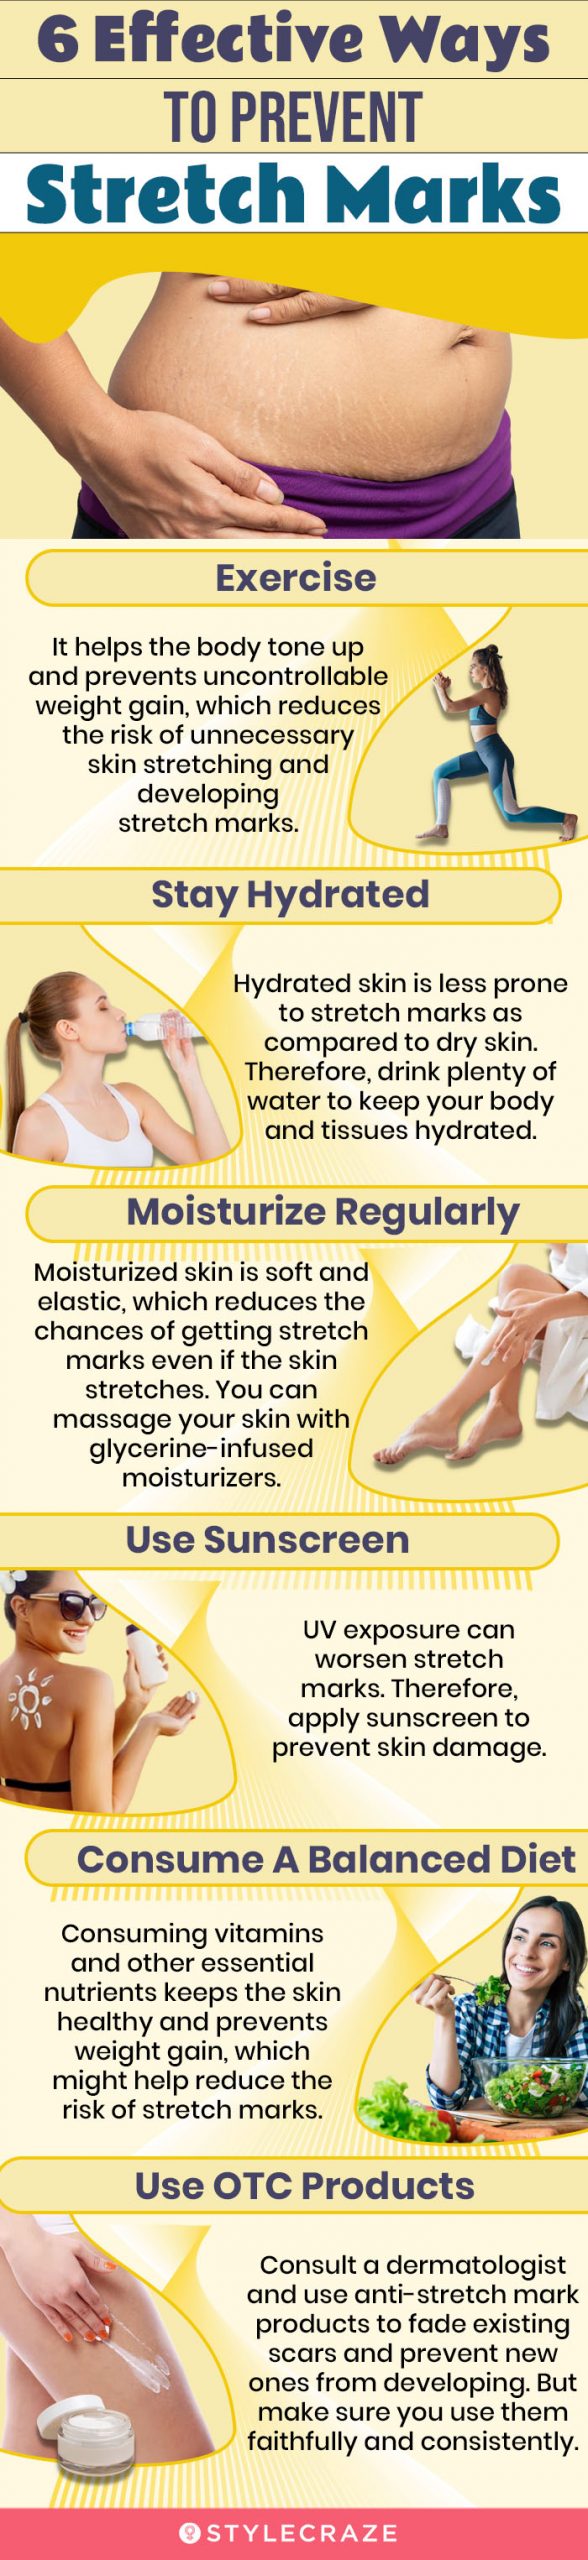 6 effective ways to prevent stretch marks (infographic)